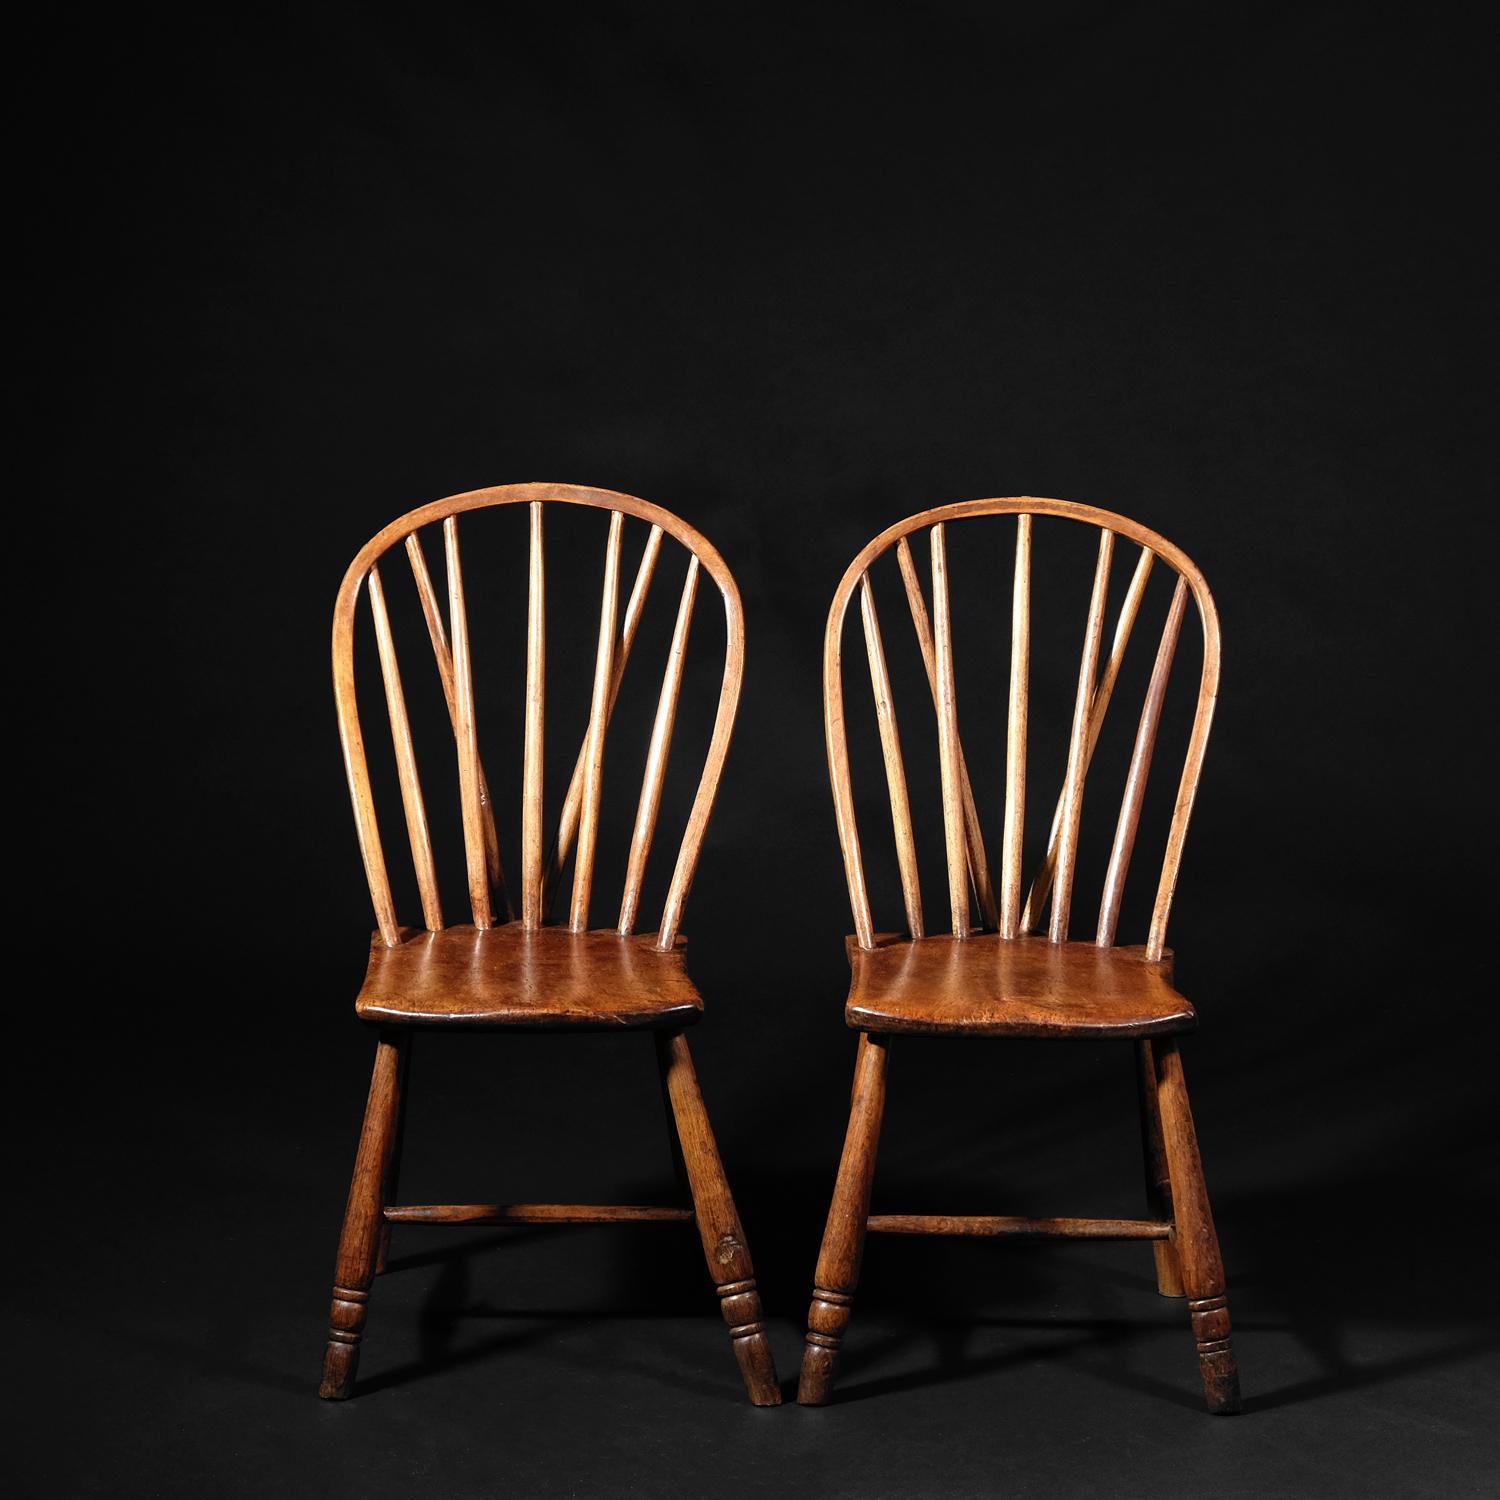 A matching pair of vernacular chairs in sycamore and ash. Egg and reel turned front legs with plain rear, united by a tapered H-stretcher. The shaped seats supporting a simple stick and hoop back. The 5 spindles, being hand-drawn and elliptical in